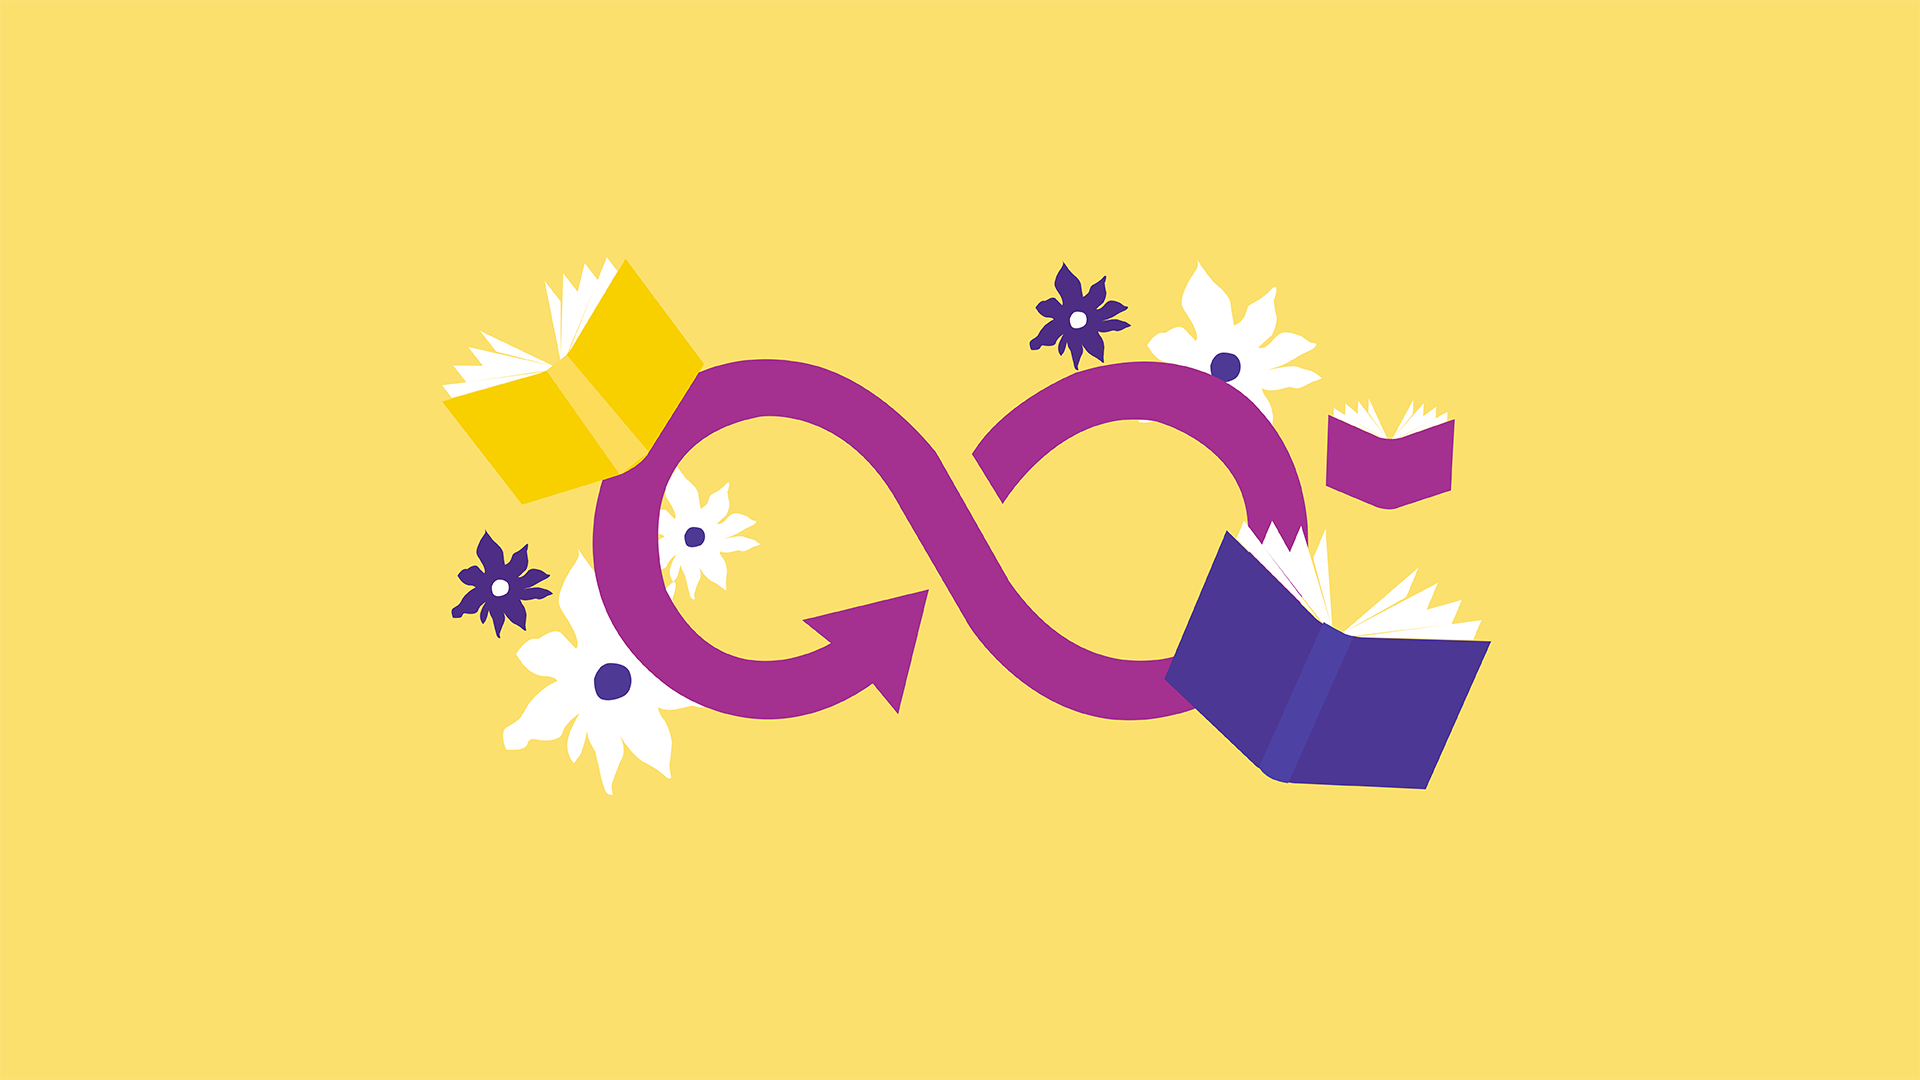 Graphic image with books, flowers and recycling icon on yellow background.